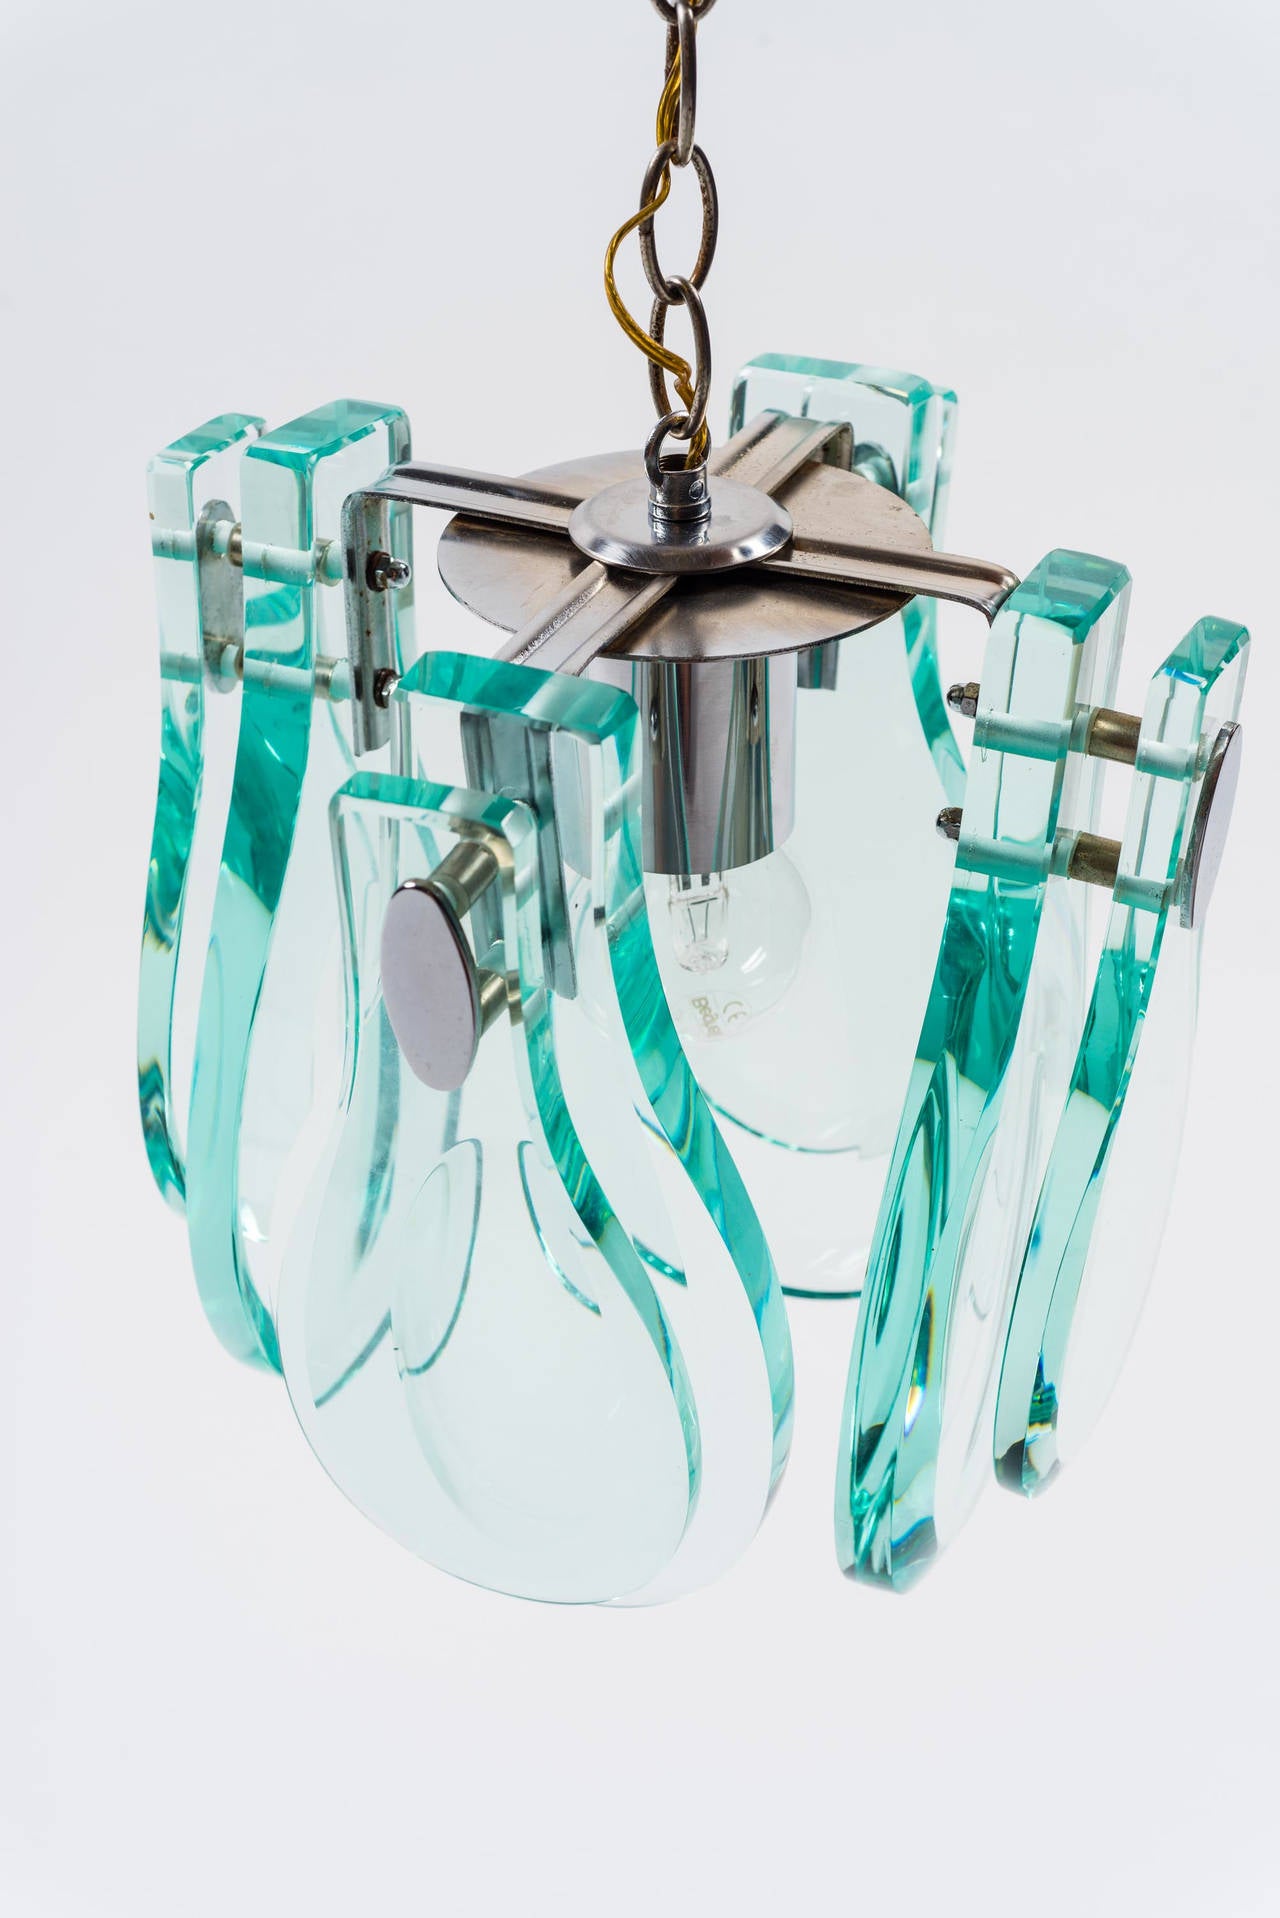 Pendant lamp with hand-sculpted glass Verde Nilo in the style of Fontana Arte, Italy, 1970.